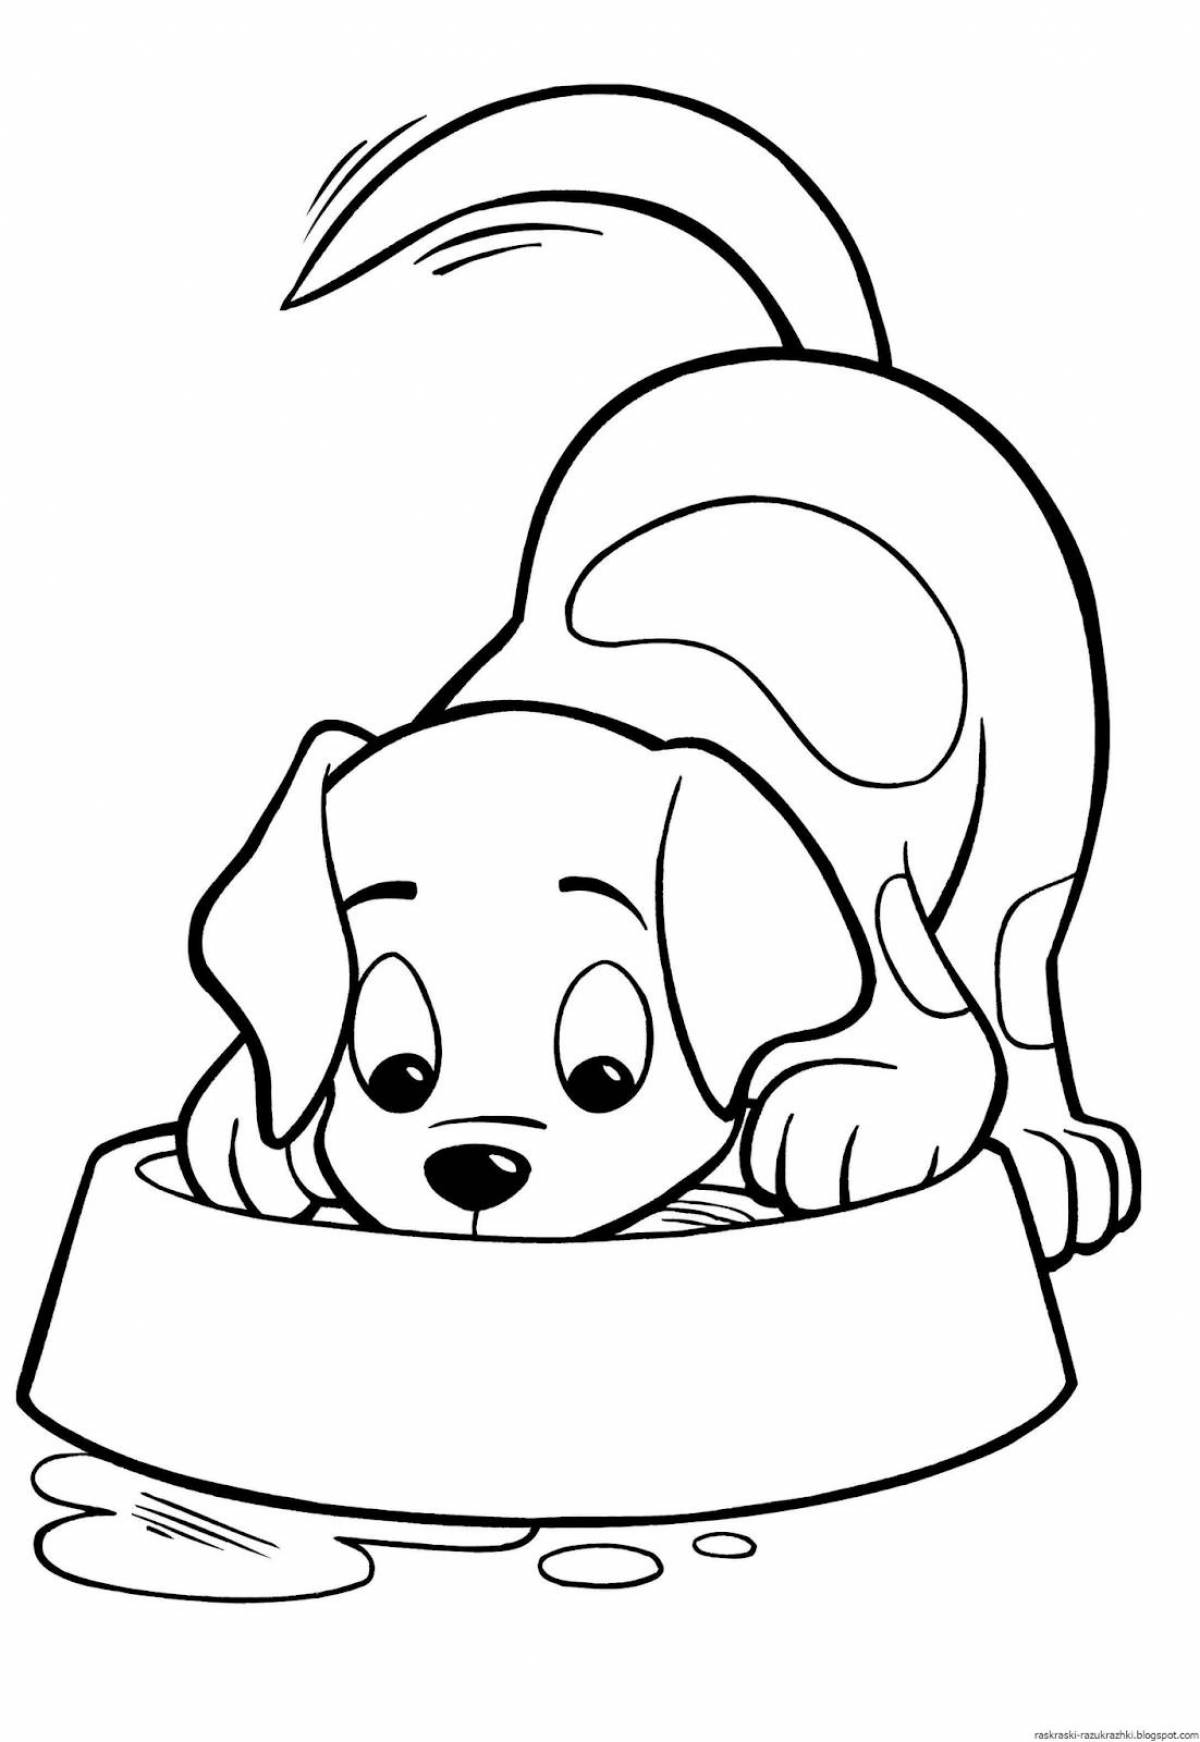 Coloring page of a sociable dog